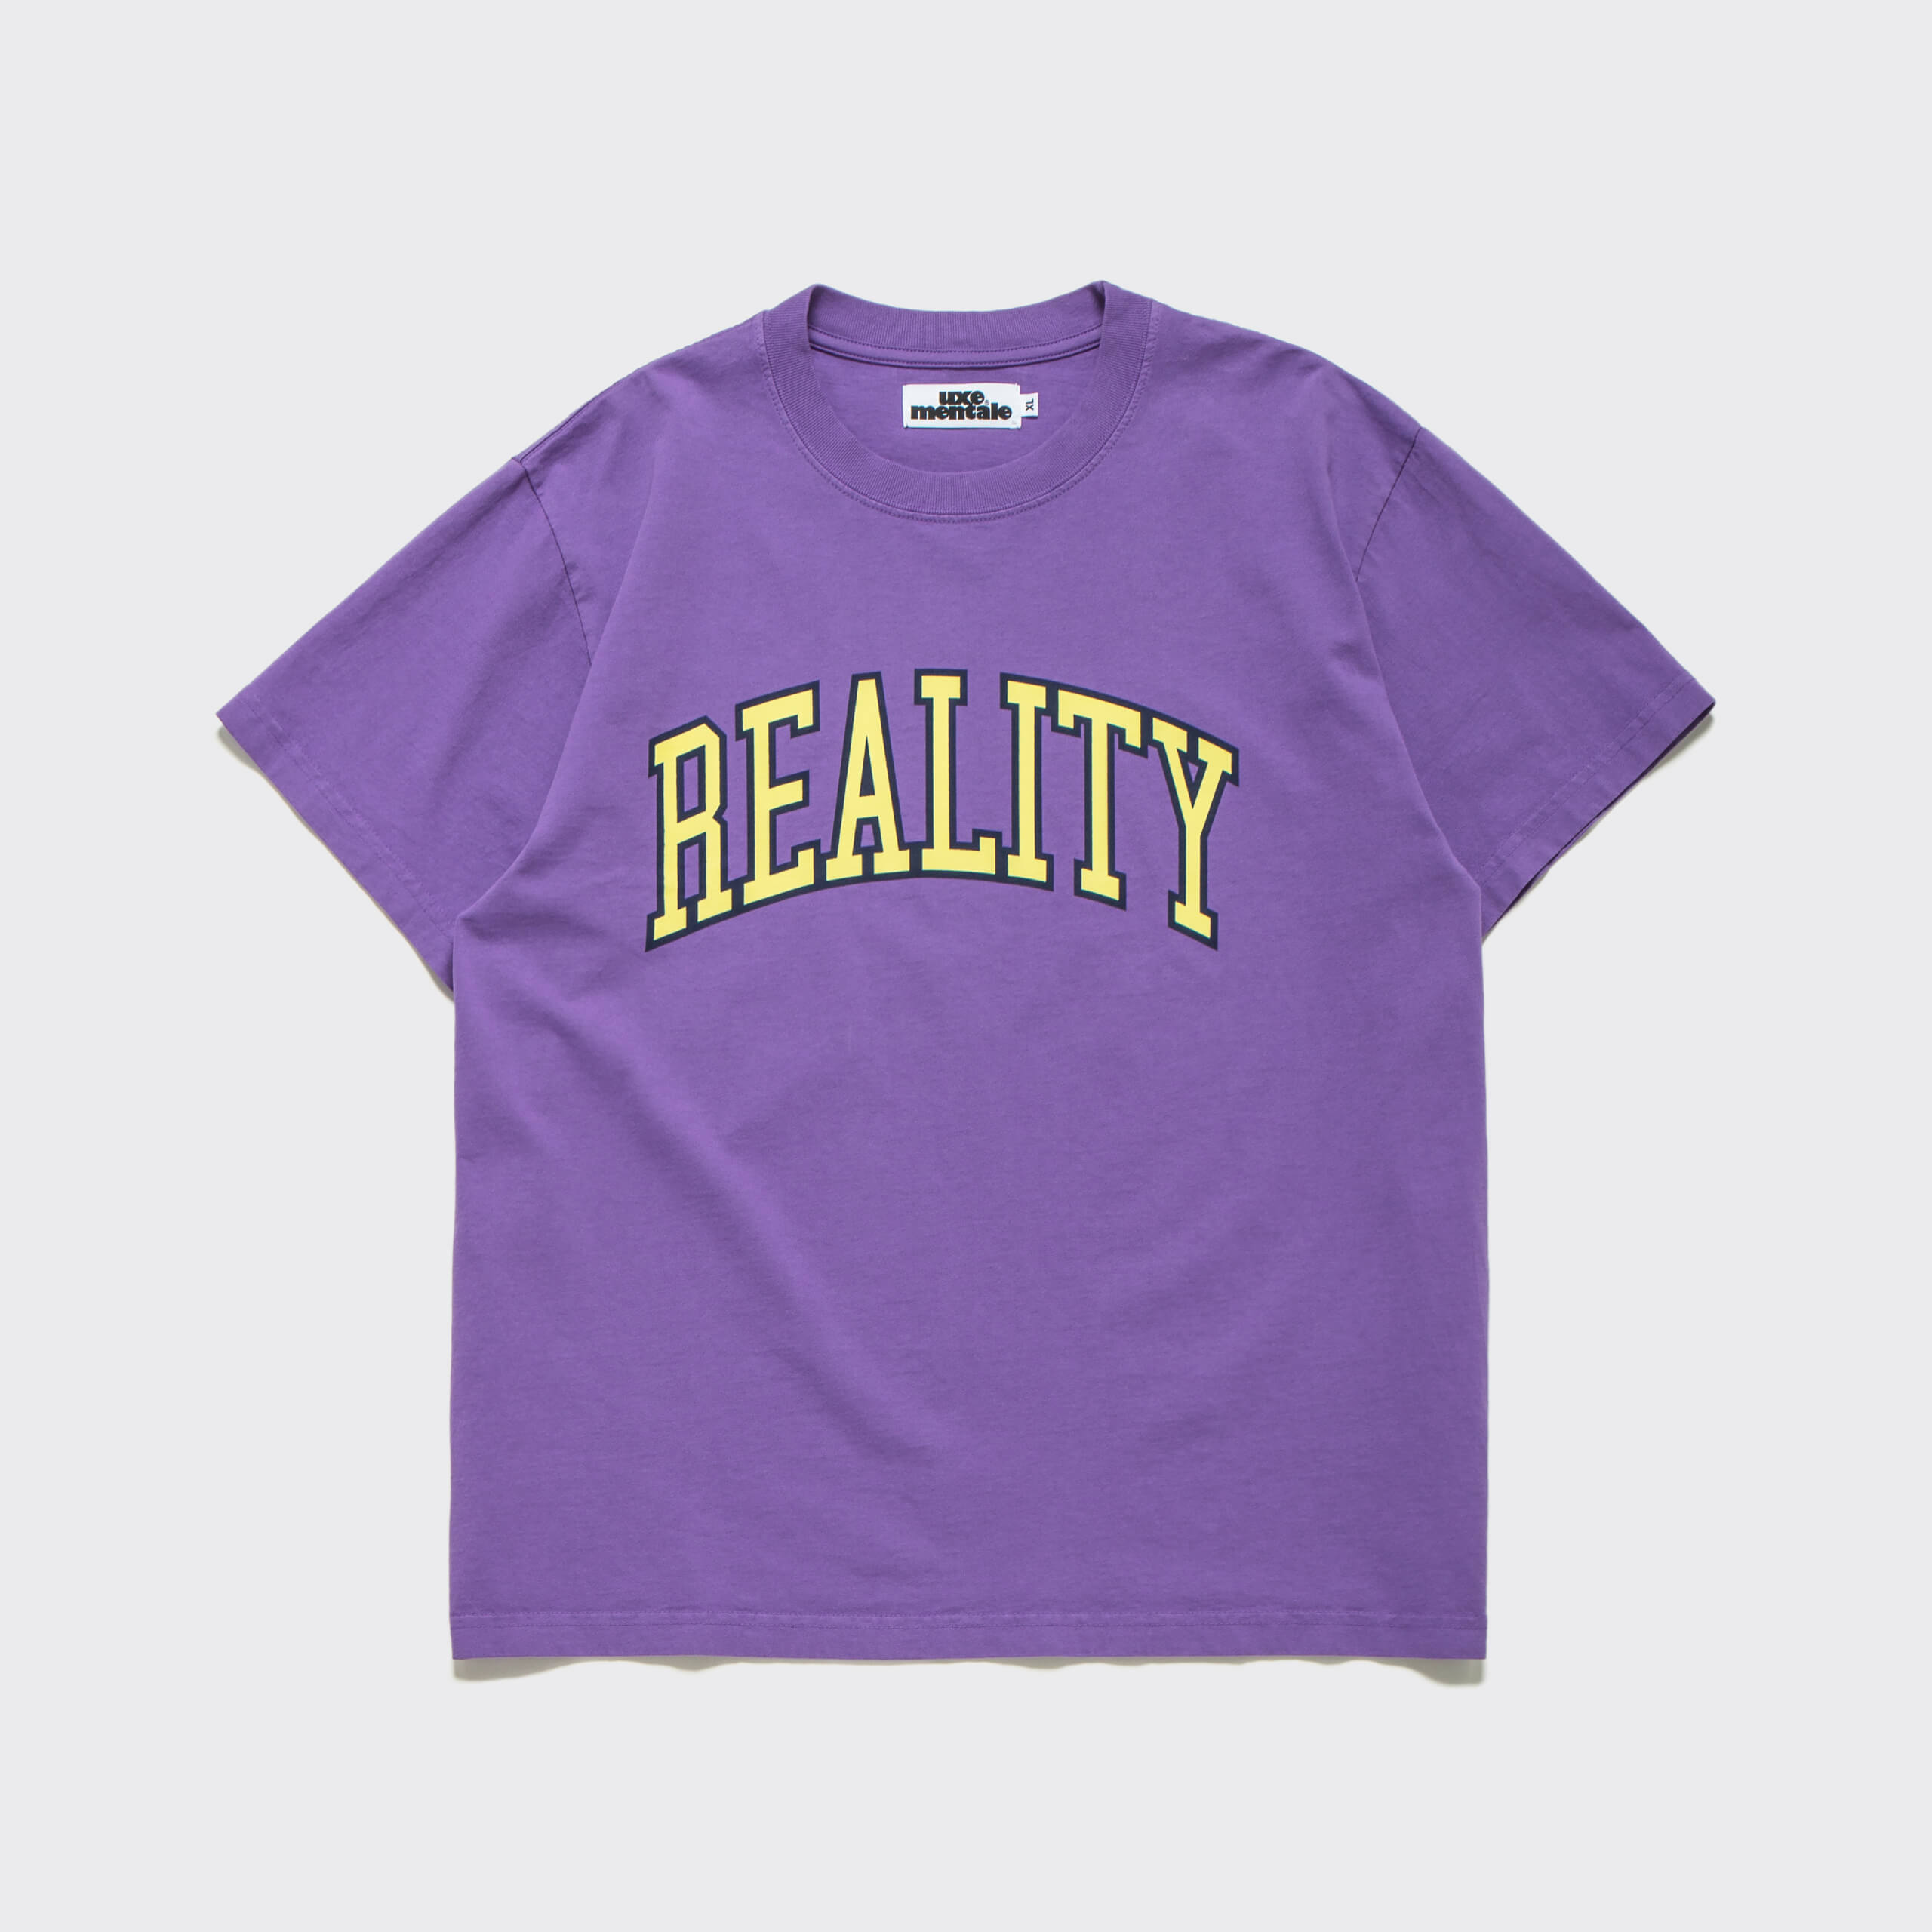 theater-of-reality-short-sleeve-tee-washed-purple_p2